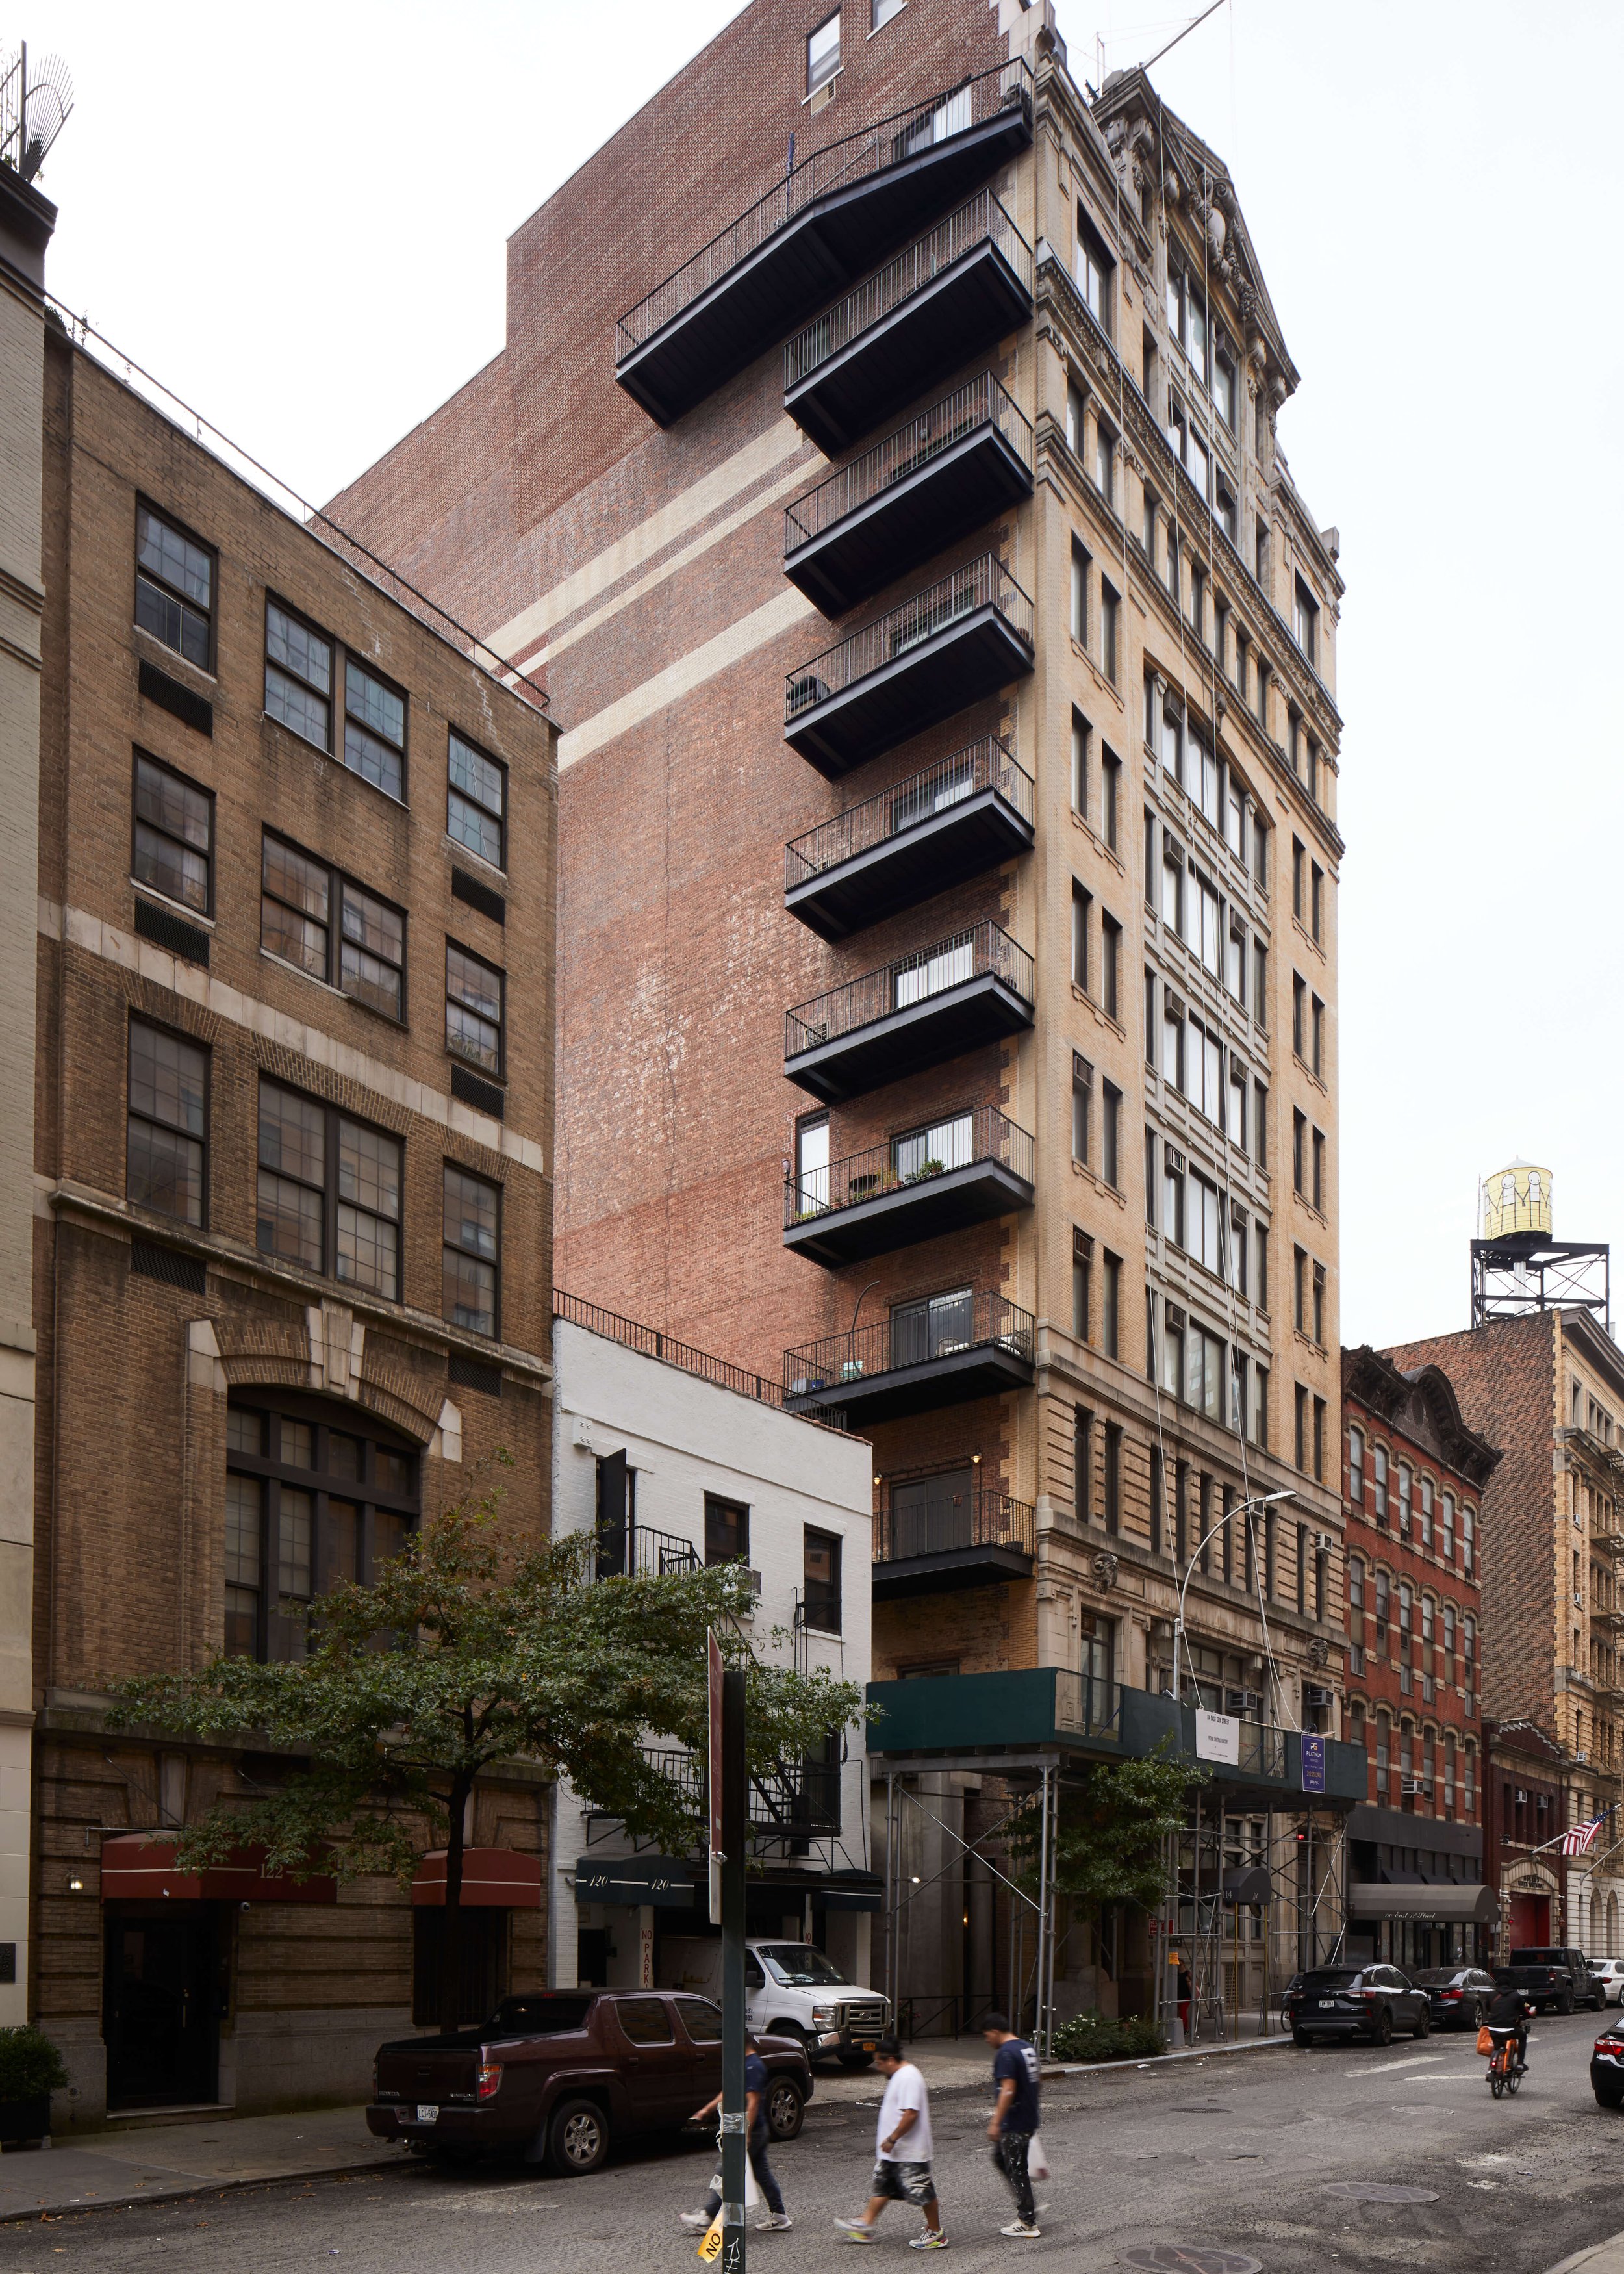  (l. to r.) 122, 120, 114-118, 112, and 106-108 East 13th Street, and 127-135 Fourth Avenue. These structures date from the late 19th through the early 20th centuries, and include commerical/industrial buildings since converted to residences, altered